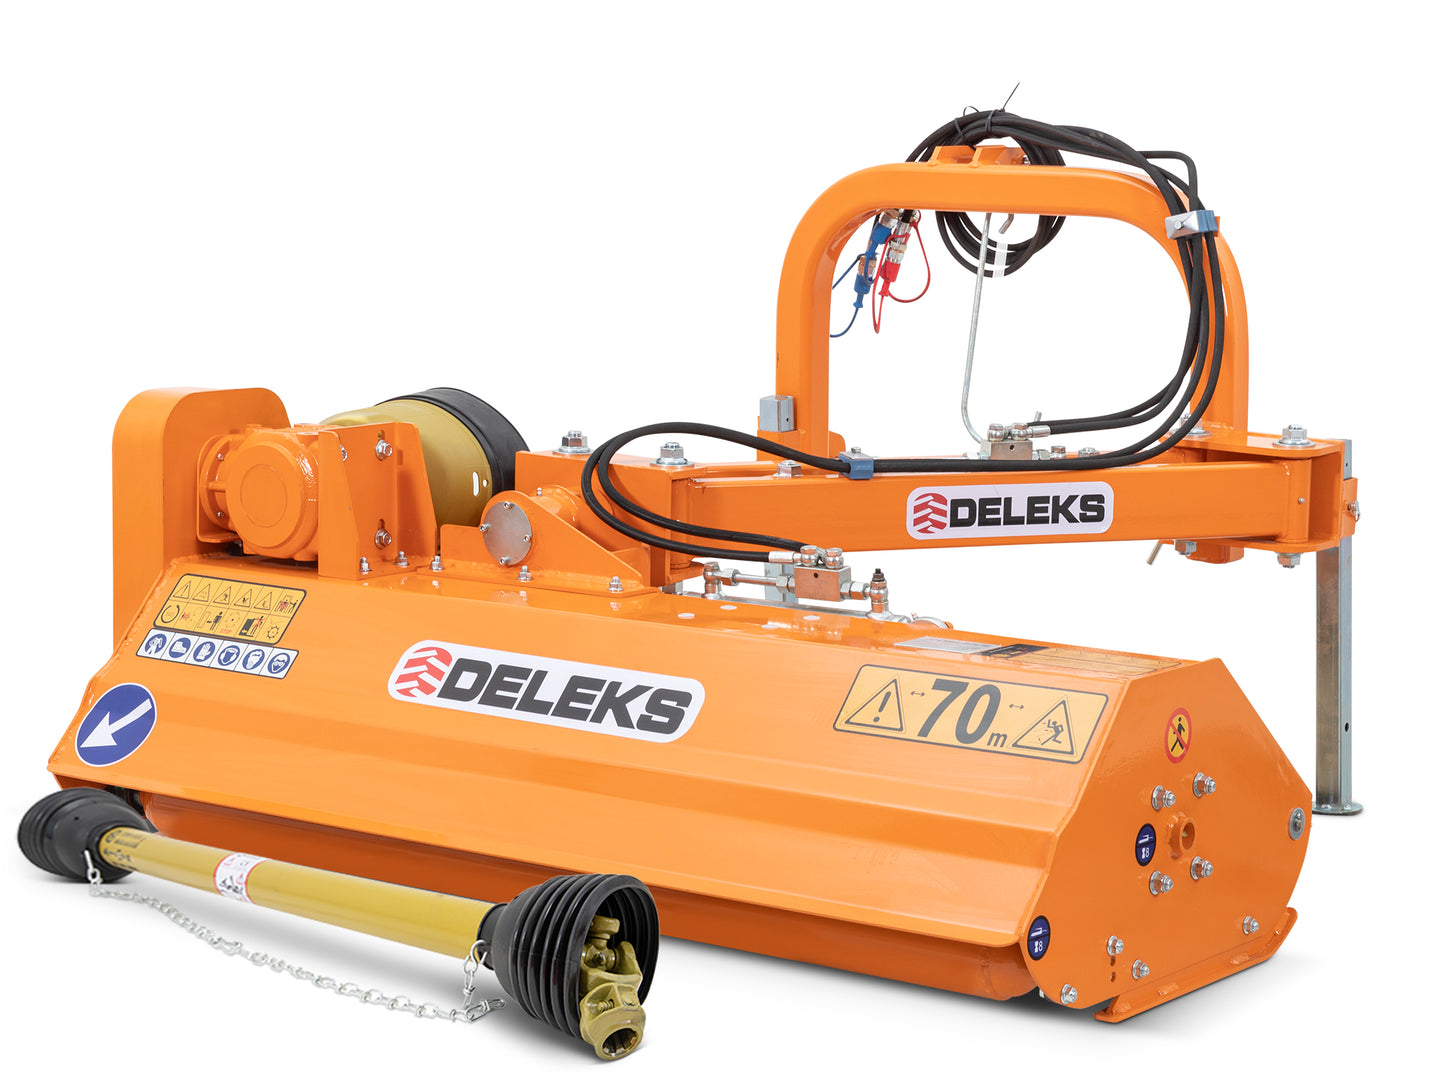 CTM and Deleks.uk Volpe Offset Verge Flail Mowers for compact tractors